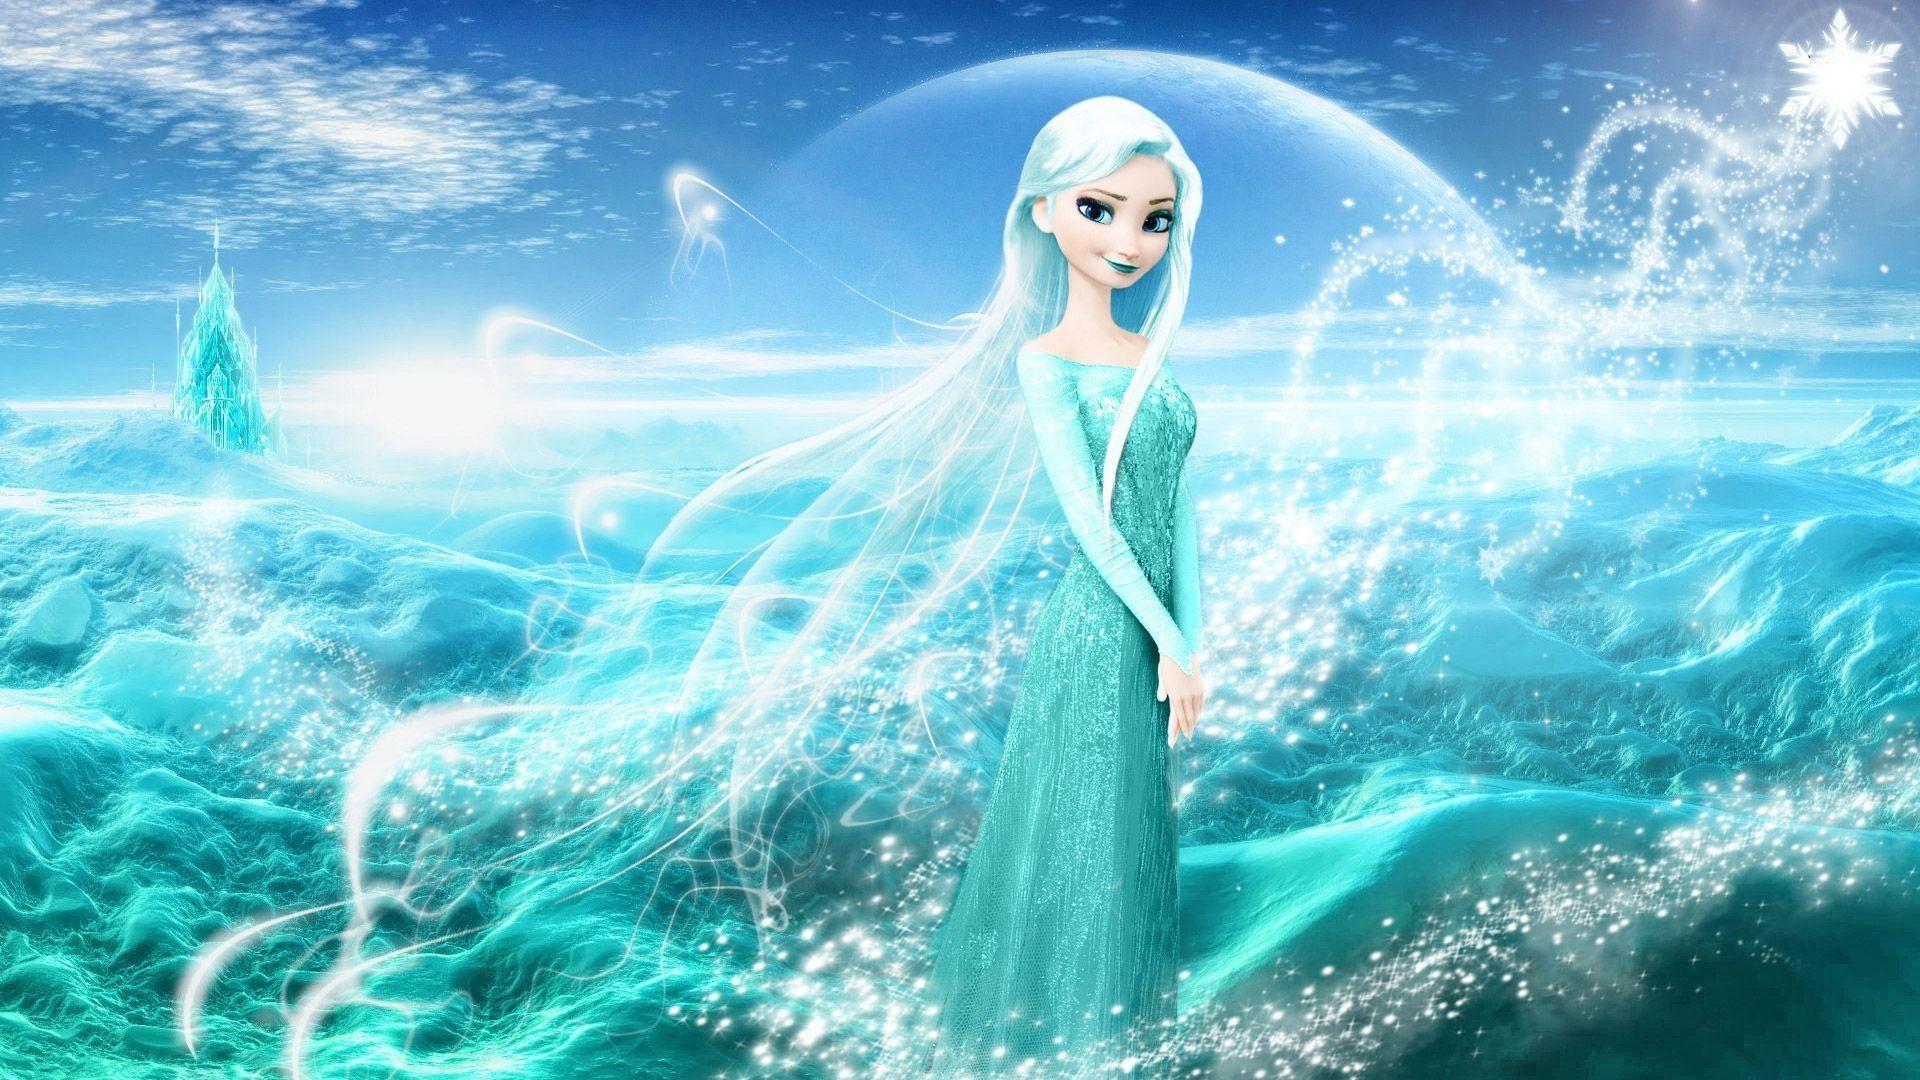 My muses  Elsa with her hair let down  Elsa Frozen2 Cre My muses  Bluntsforce thorslilbitch  Facebook